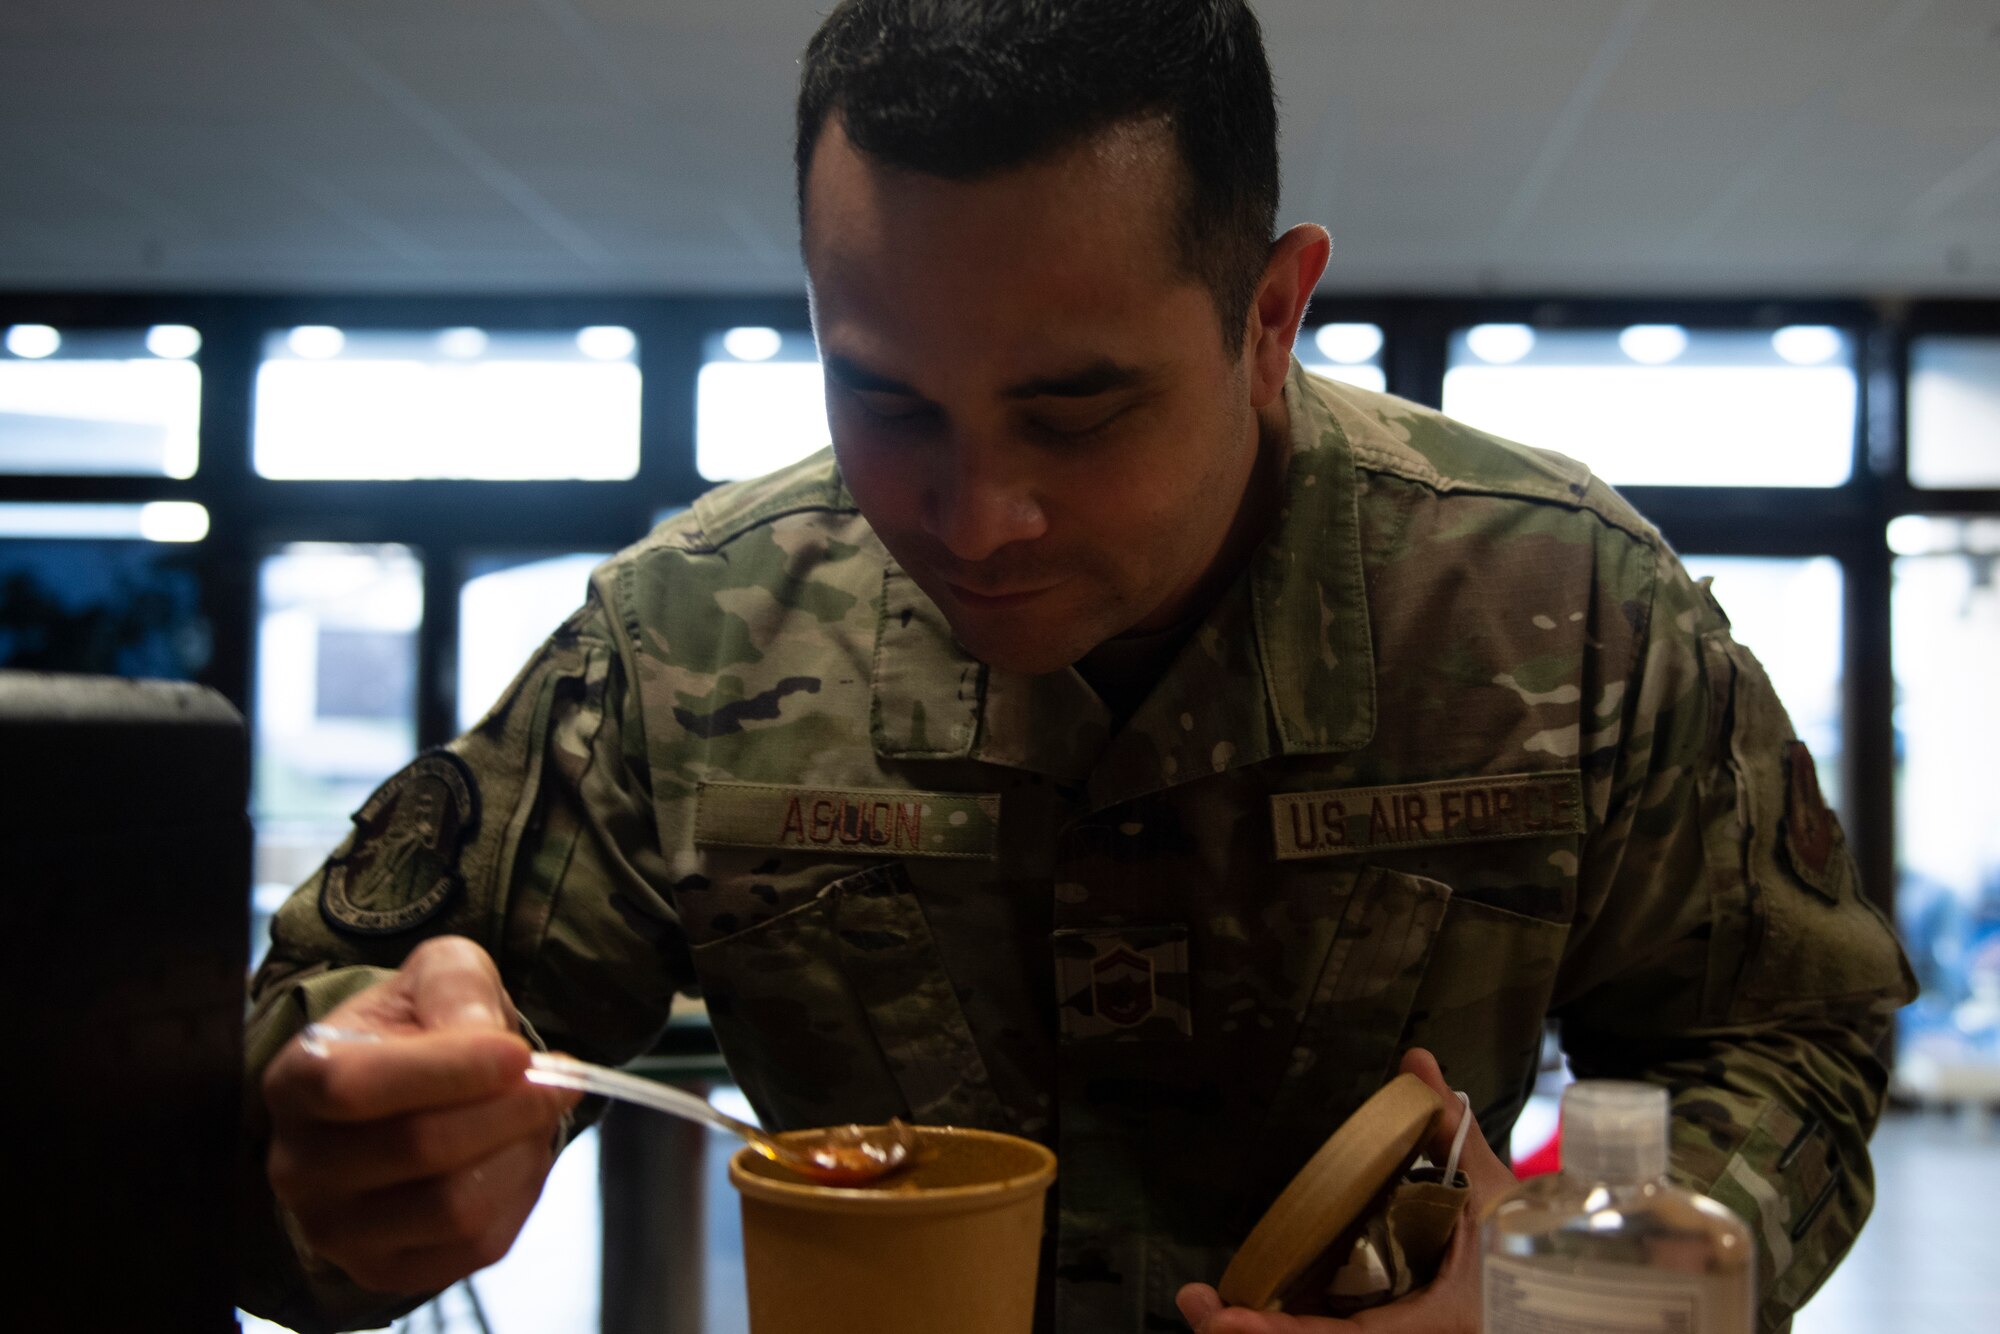 A photo of an Airman preparing to eat soup.